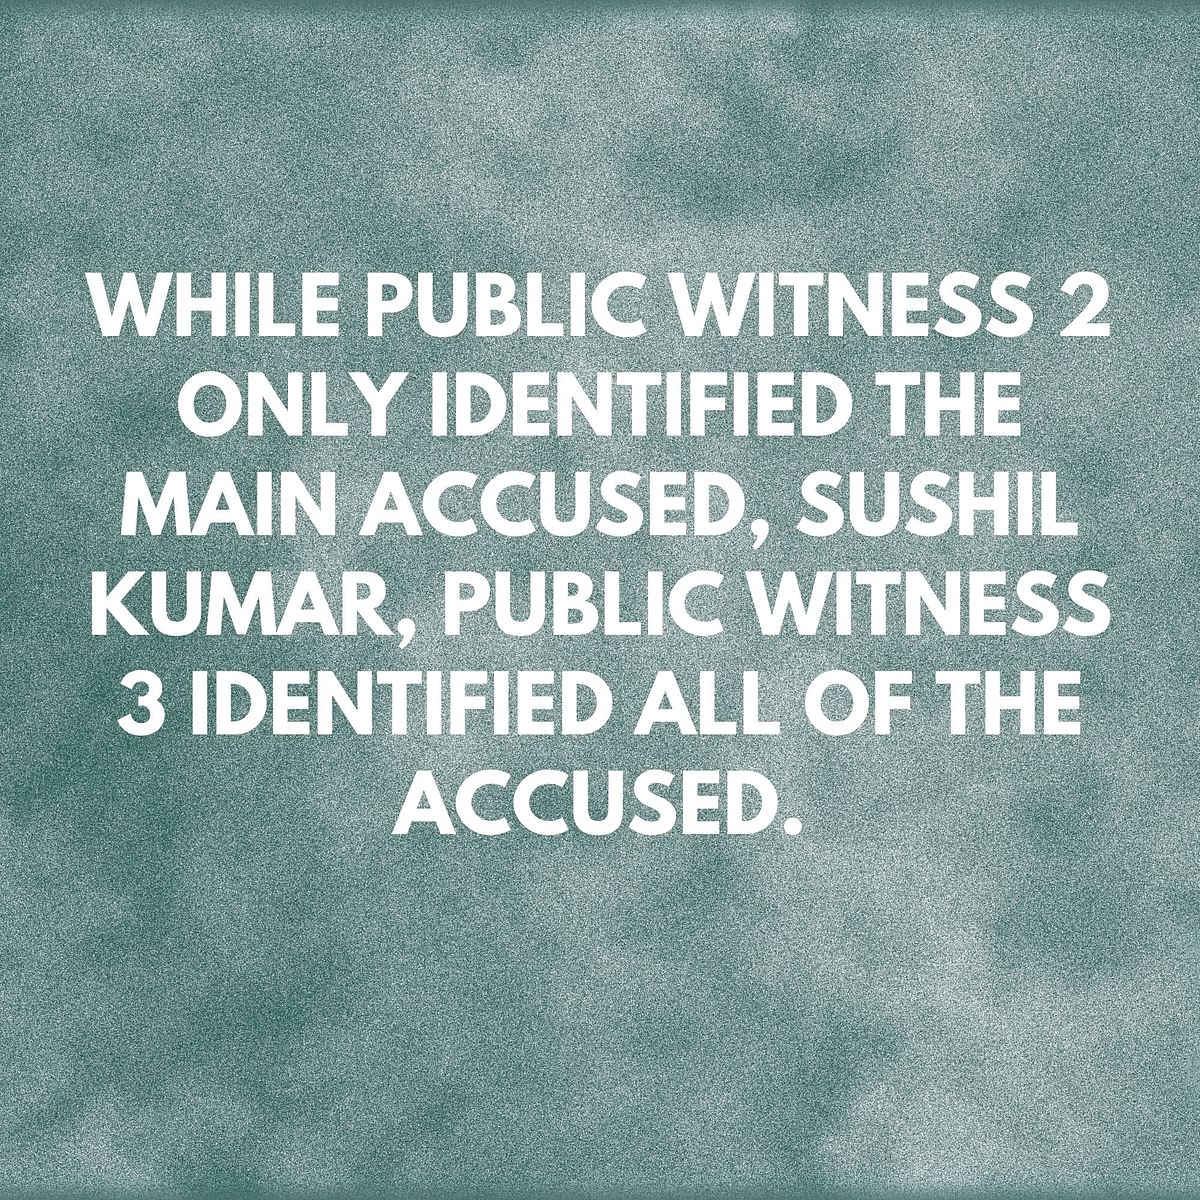 In this story we analyse the evidence and 16 identical disclosure statements that the accused ‘refused to sign’.